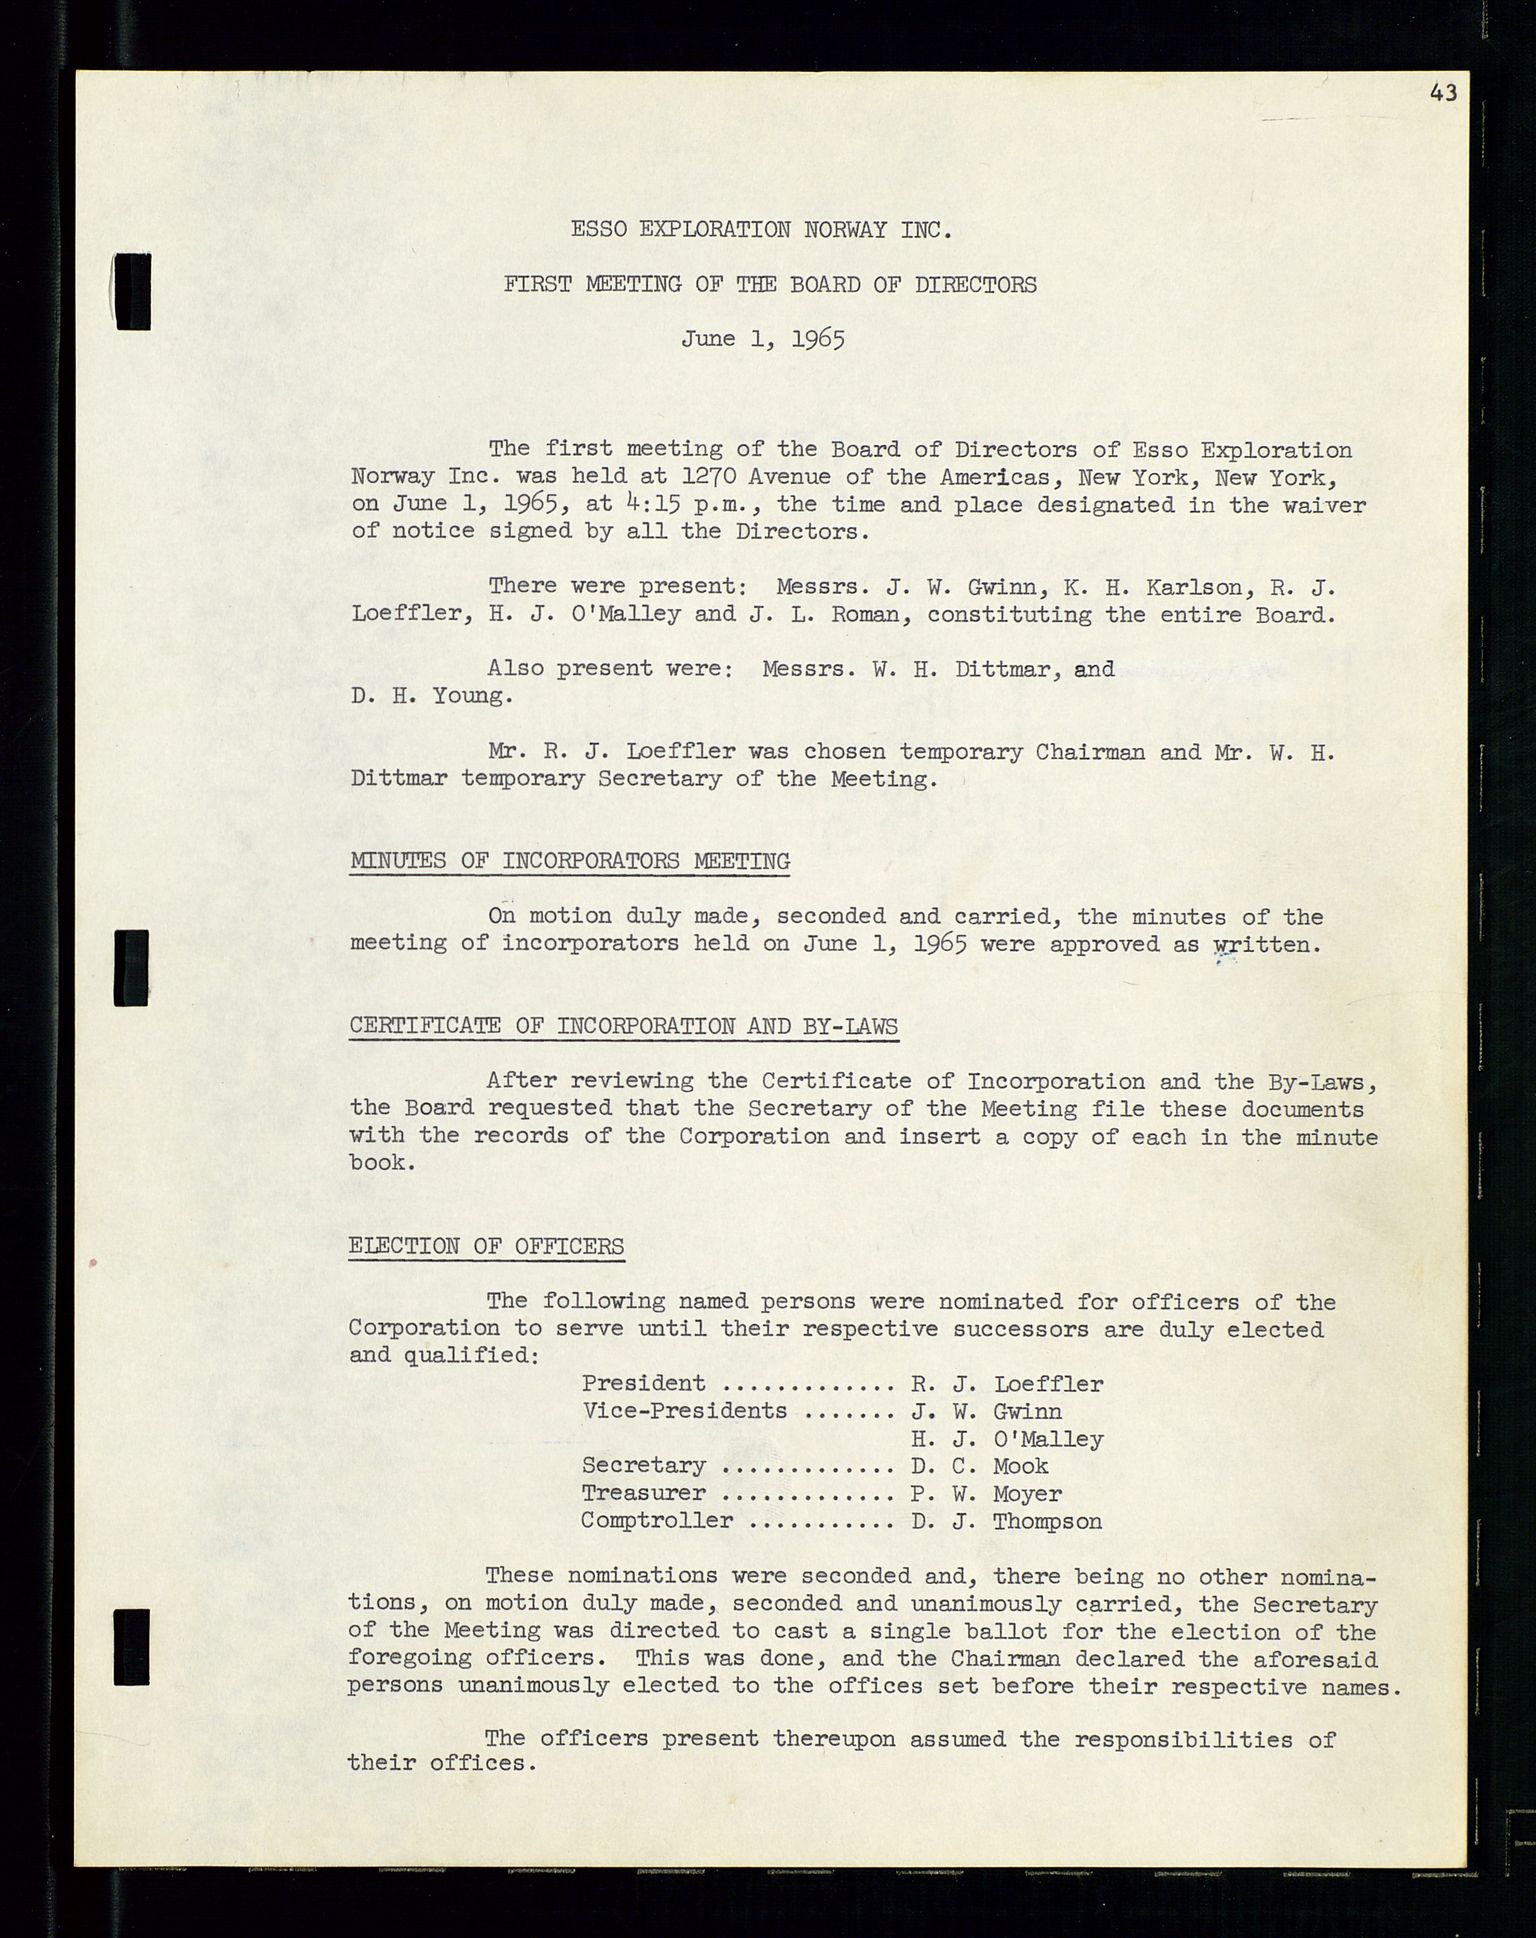 Pa 1512 - Esso Exploration and Production Norway Inc., SAST/A-101917/A/Aa/L0001/0001: Styredokumenter / Corporate records, By-Laws, Board meeting minutes, Incorporations, 1965-1975, s. 43